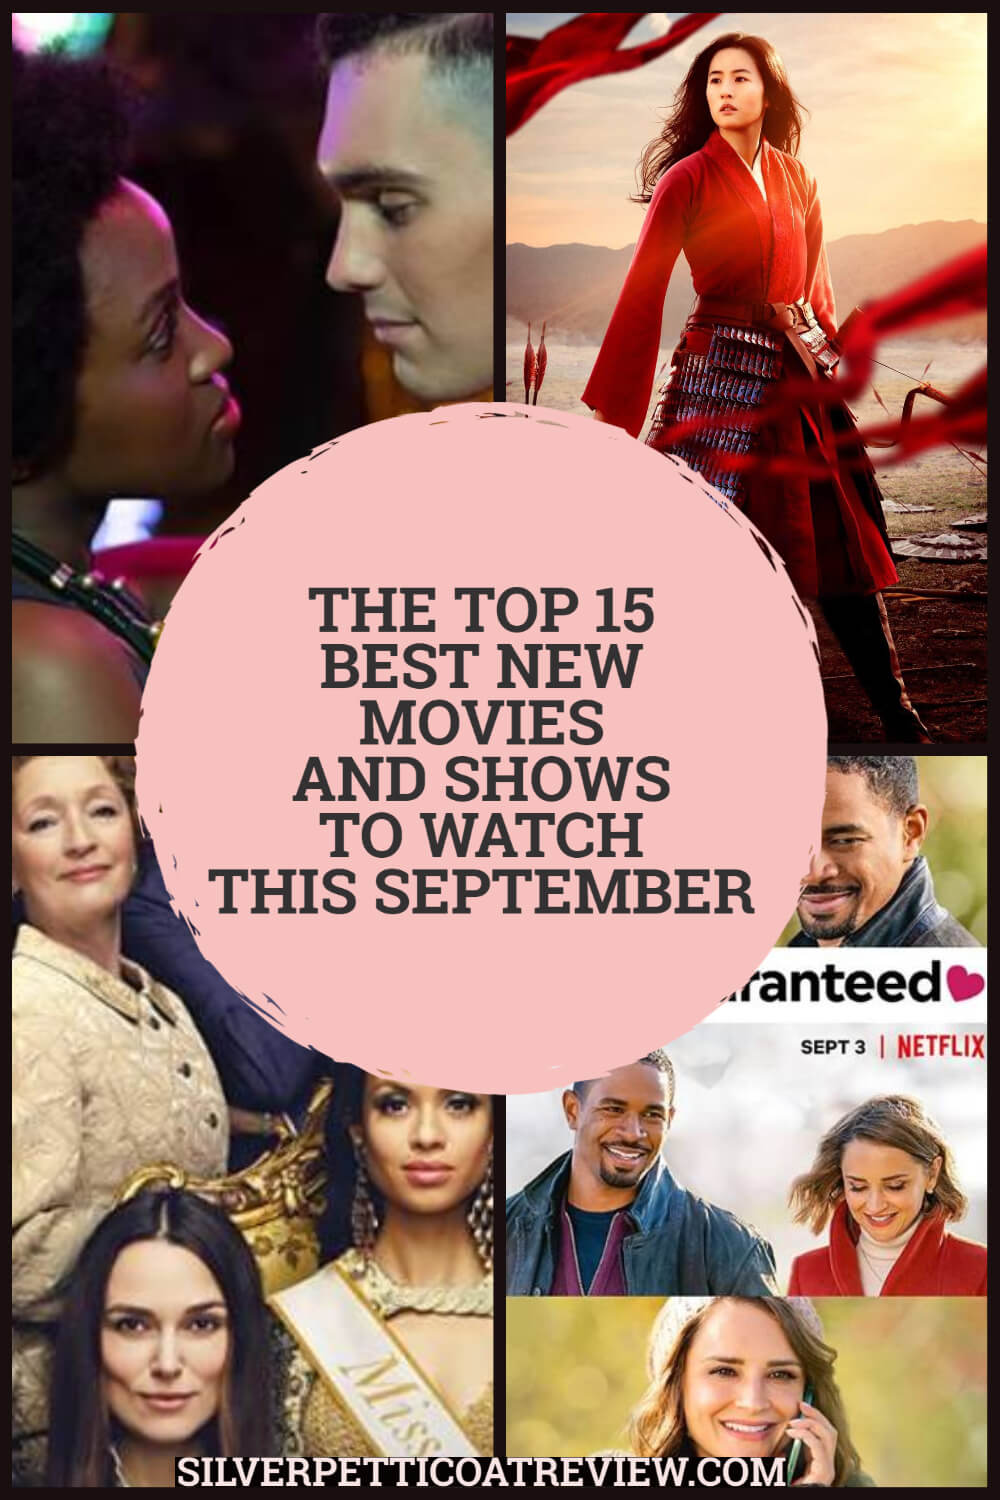 The Top 15 Best New Movies and Shows to Watch This September